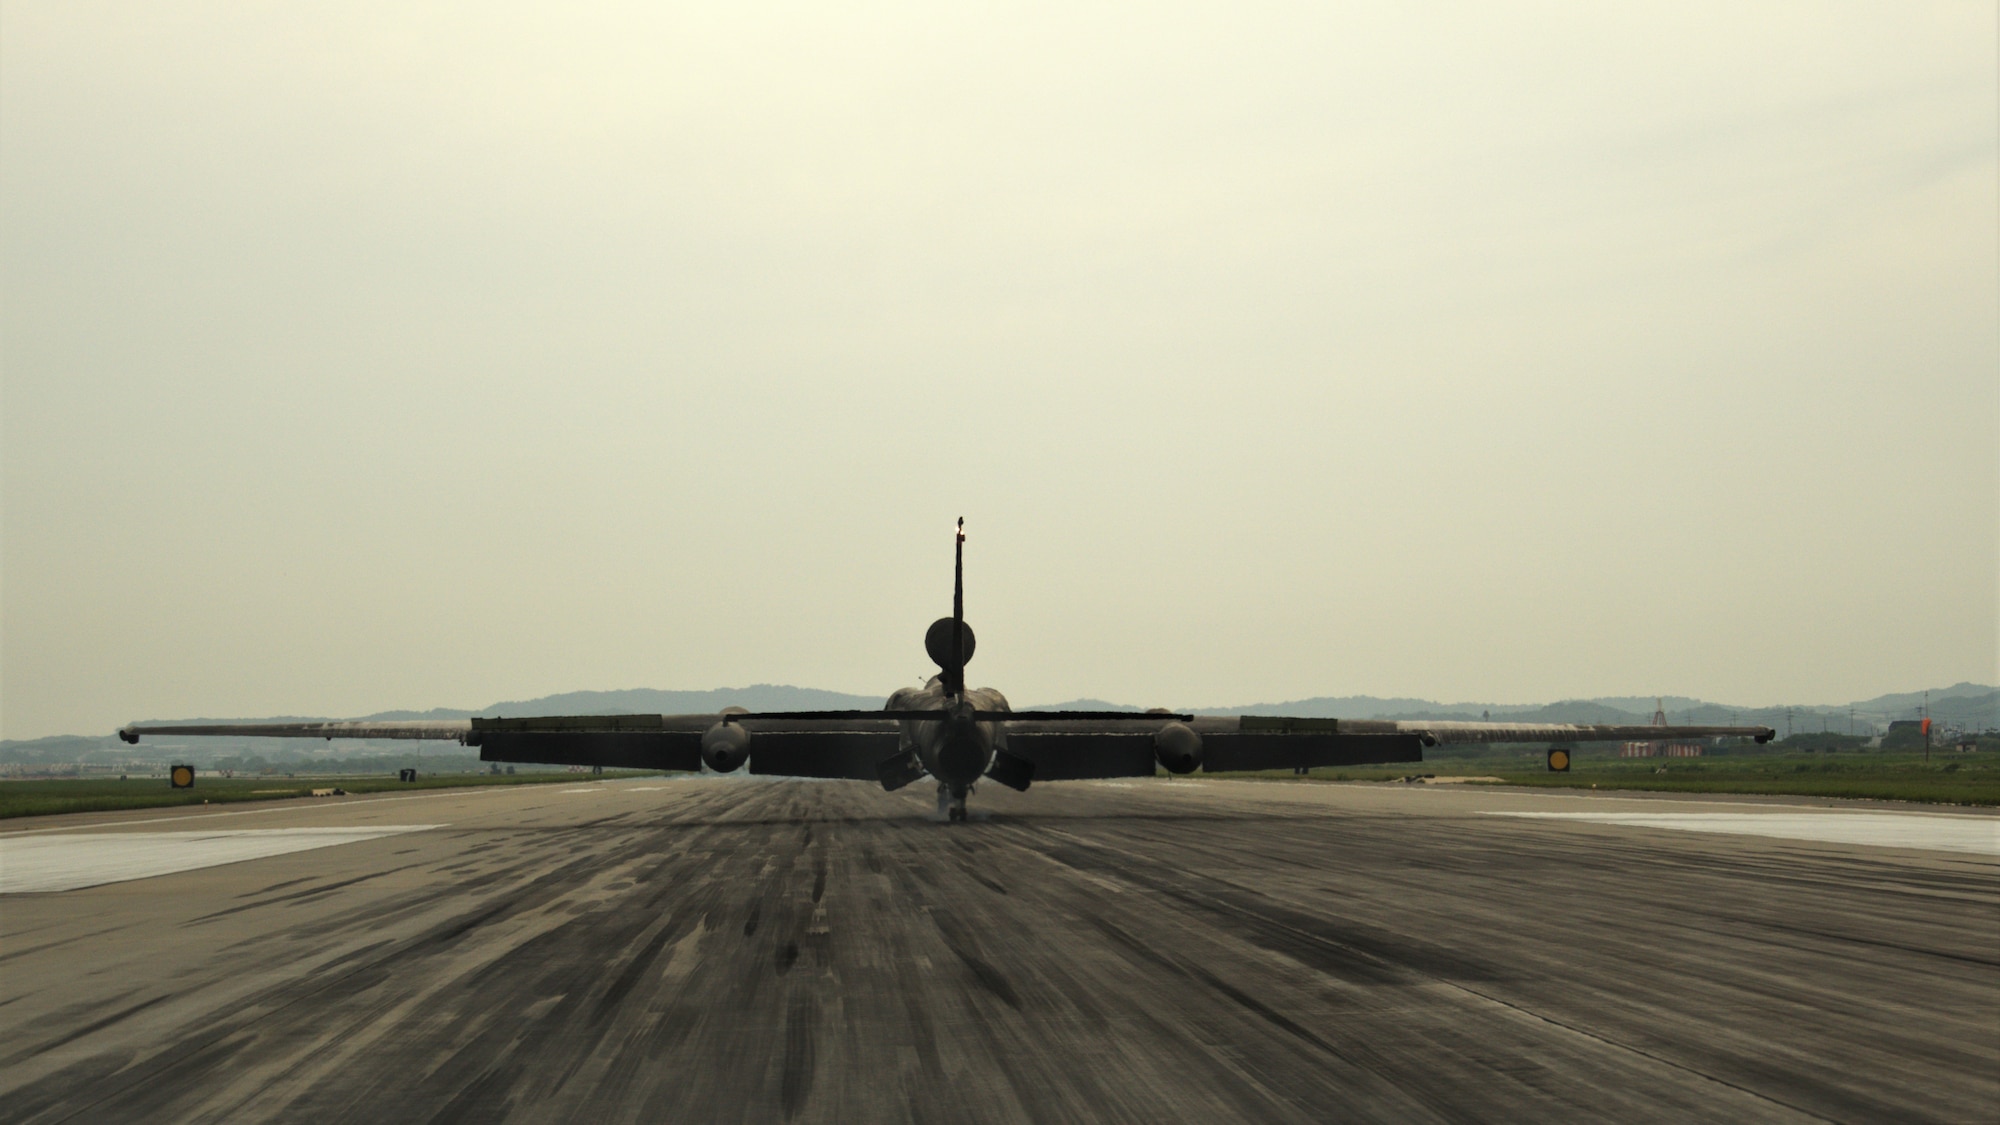 The U-2 touches down on the runway, completing a successful flight.